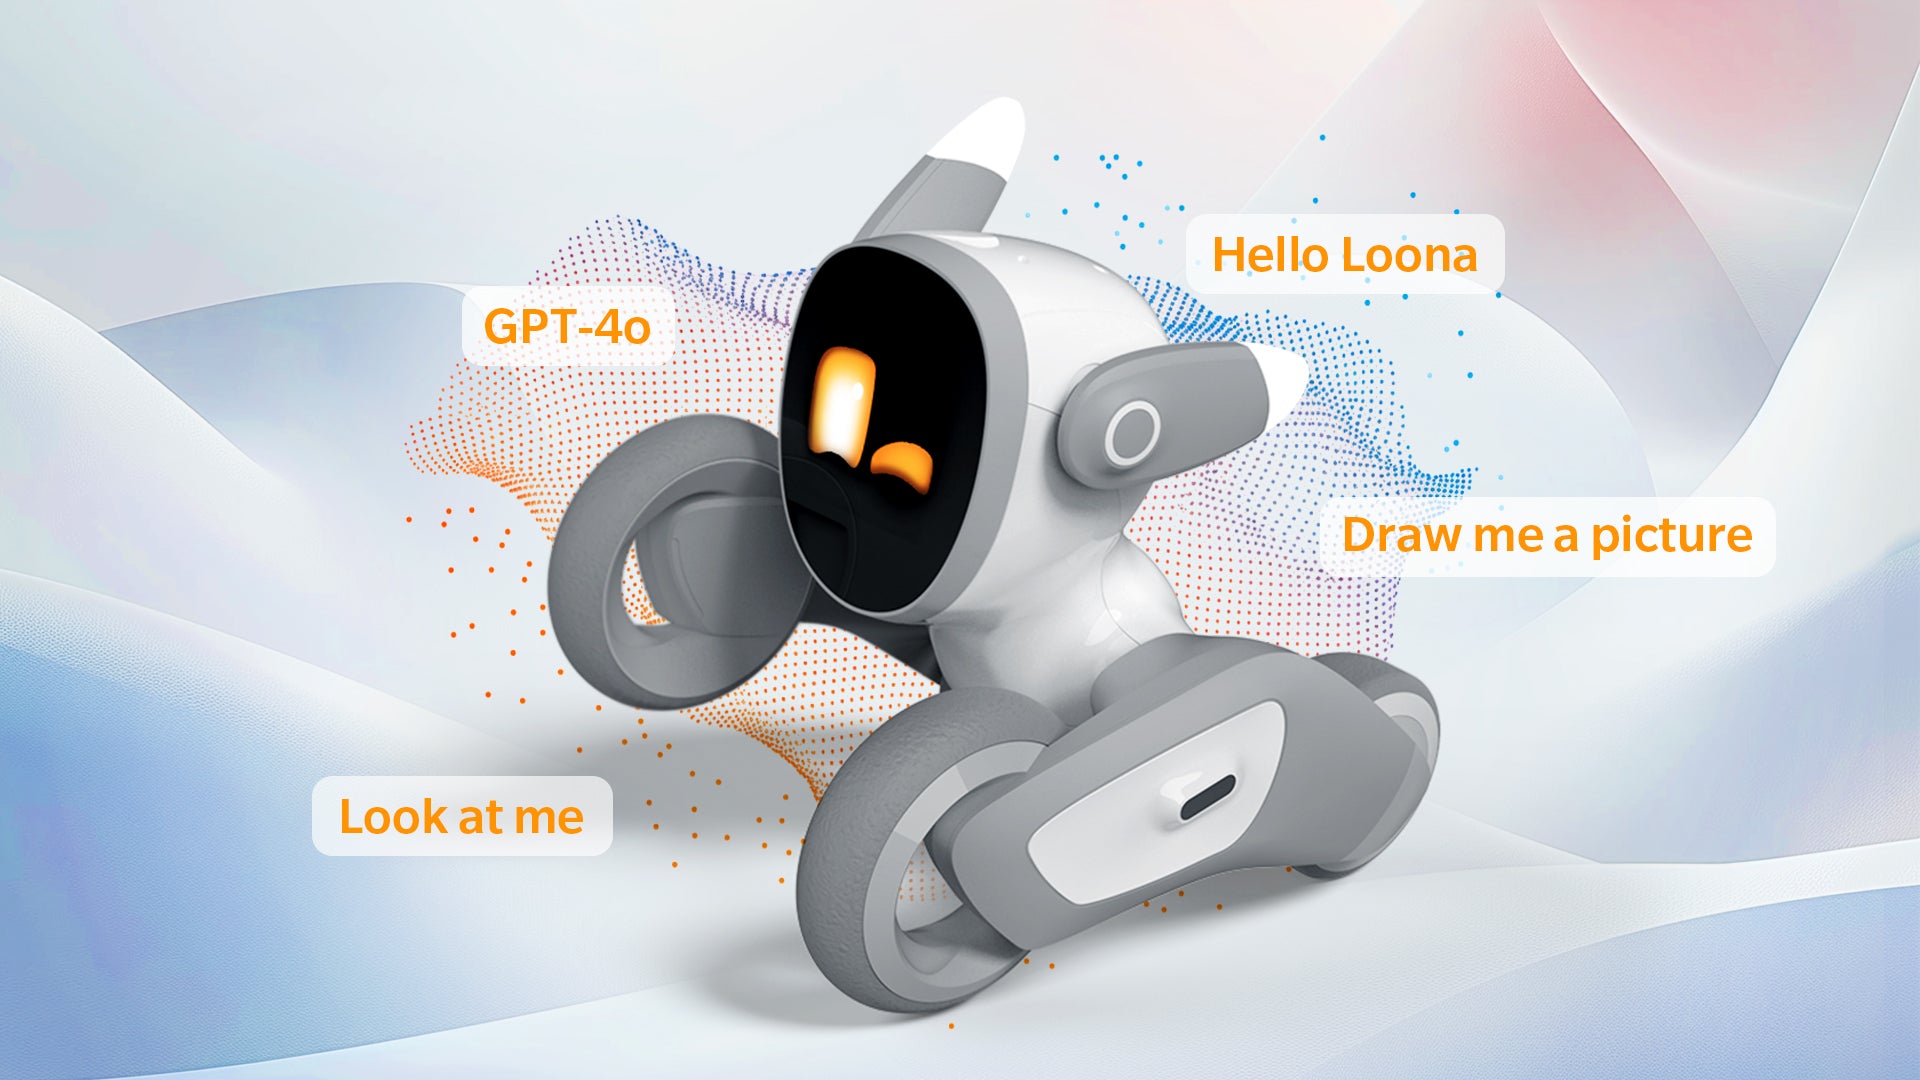 Loona V19 Update: Integrated with GPT-4o, the First AI Pet with Memory